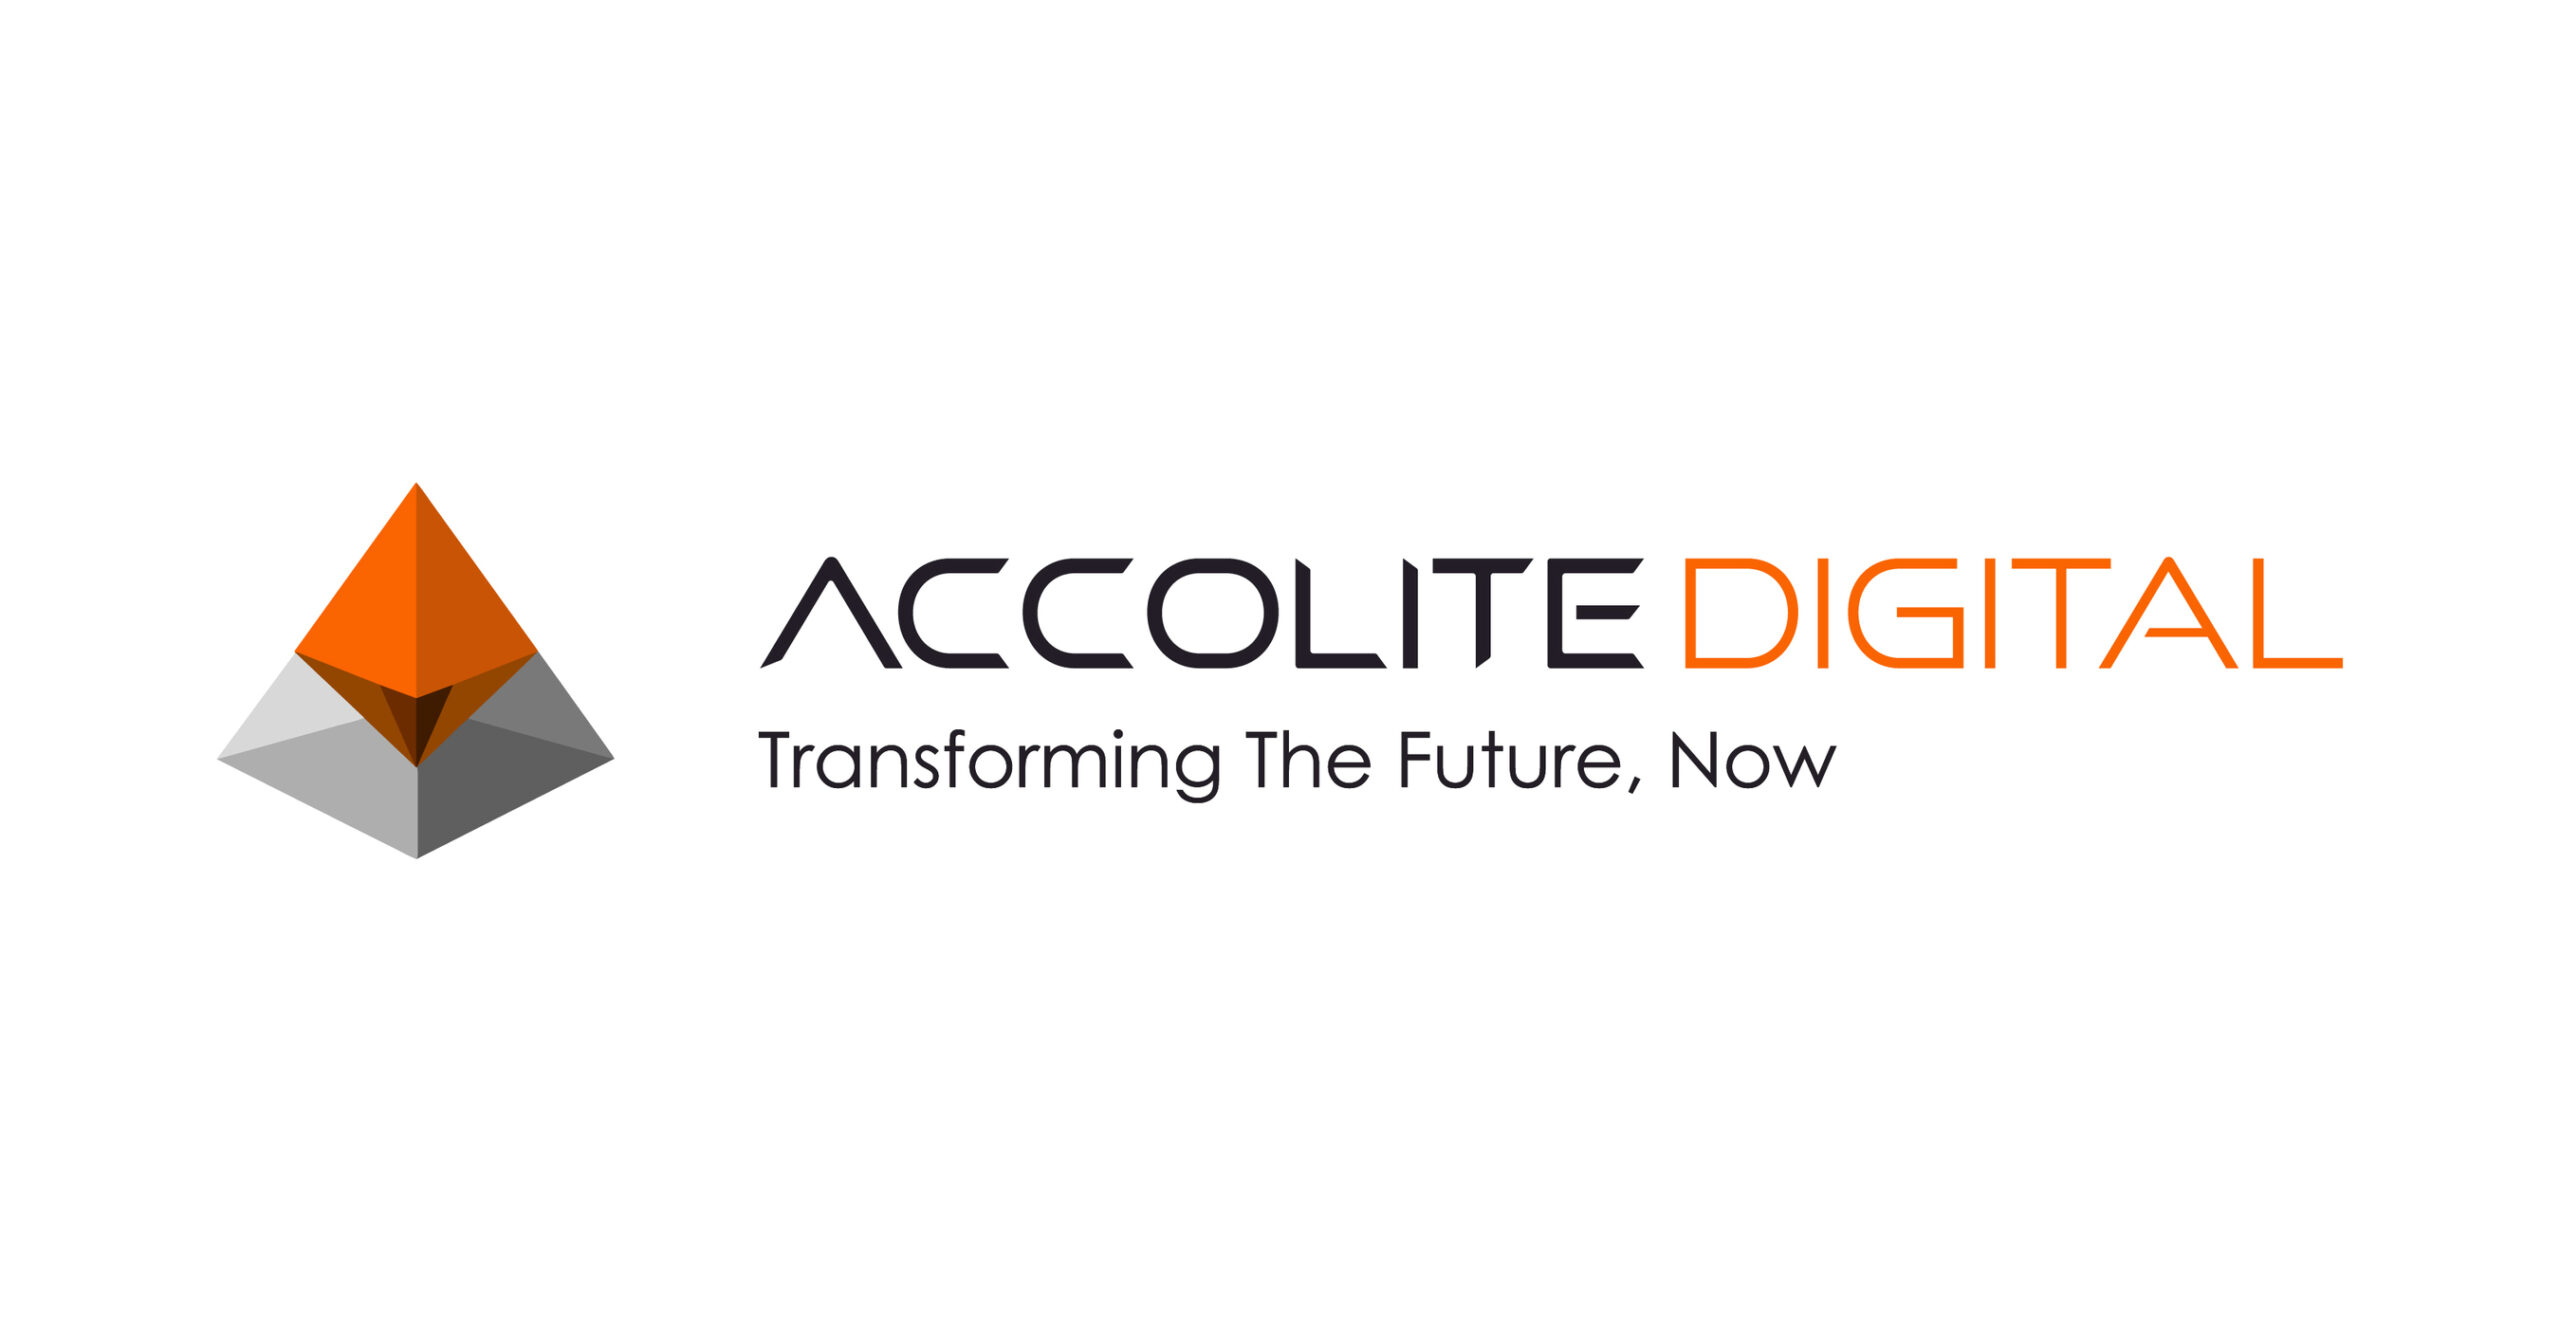 Accolite Digital Off Campus Drive 2021 | Software Engineer | BE, B.Tech, MCA | Apply Jobs Online